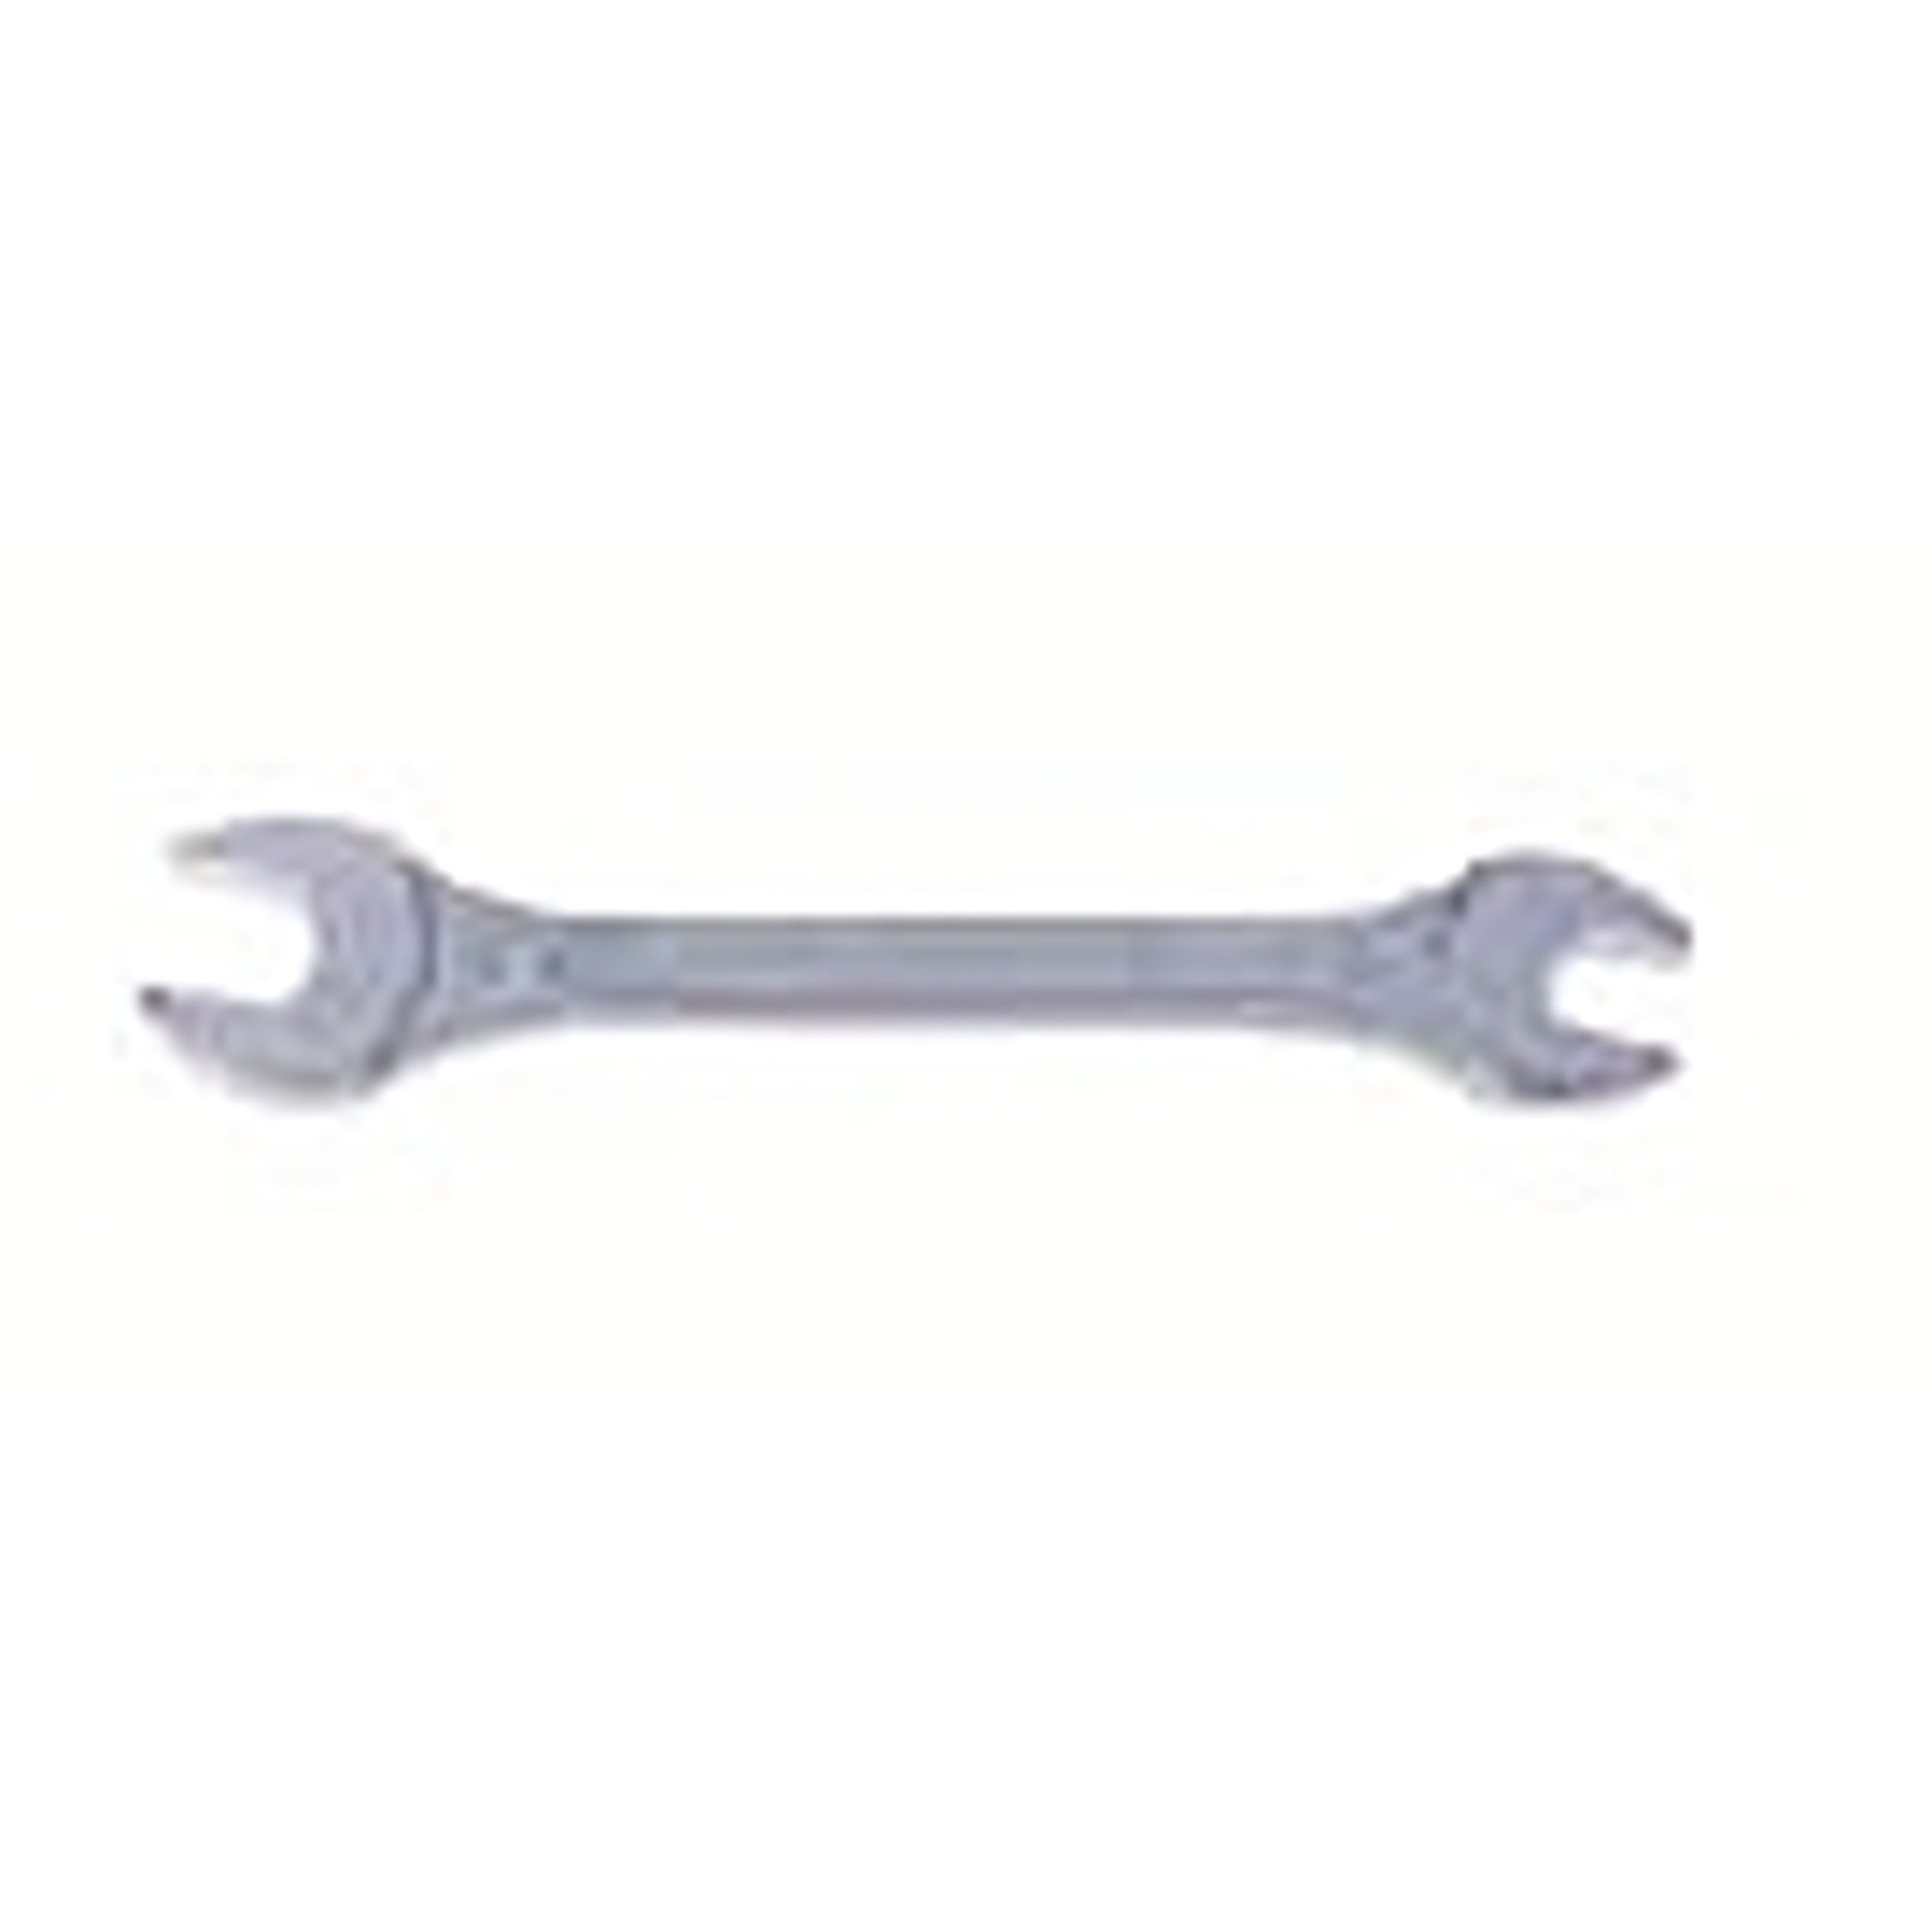 BRITOOL 2J Open Jaw Wrenches - AF (BRITOOL) - Premium Open Jaw Wrench from BRITOOL - Shop now at Yew Aik.